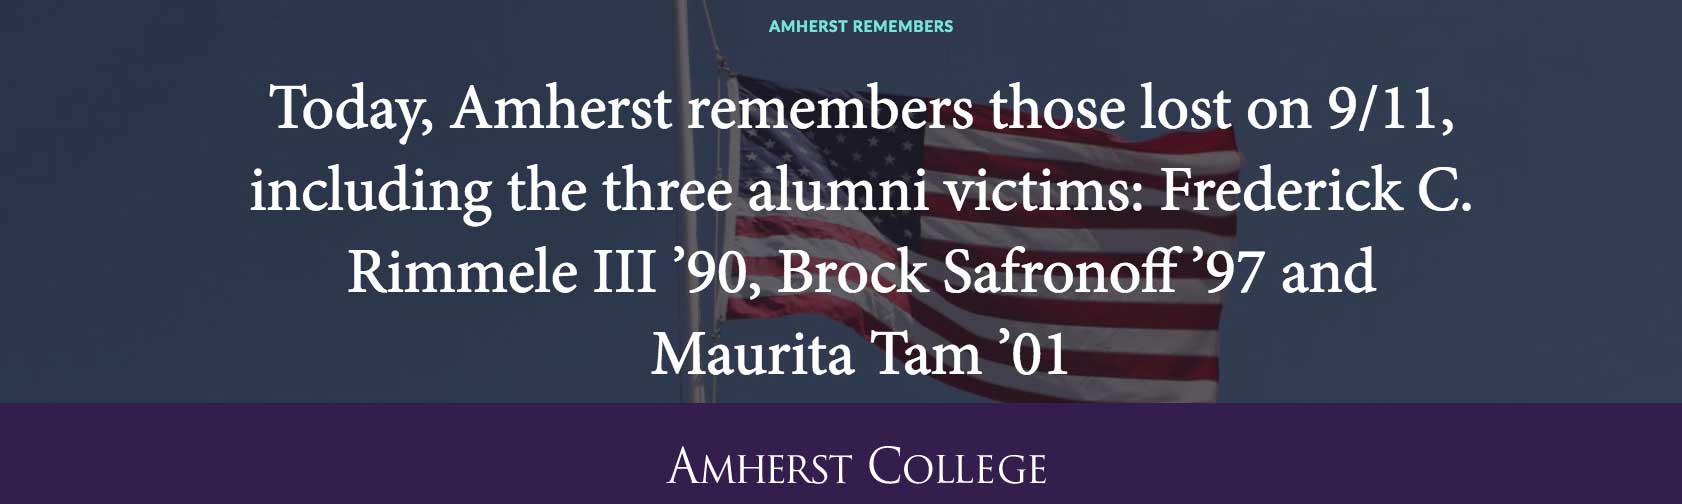 Today, Amherst remembers those lost on 9/11, including the three alumni.